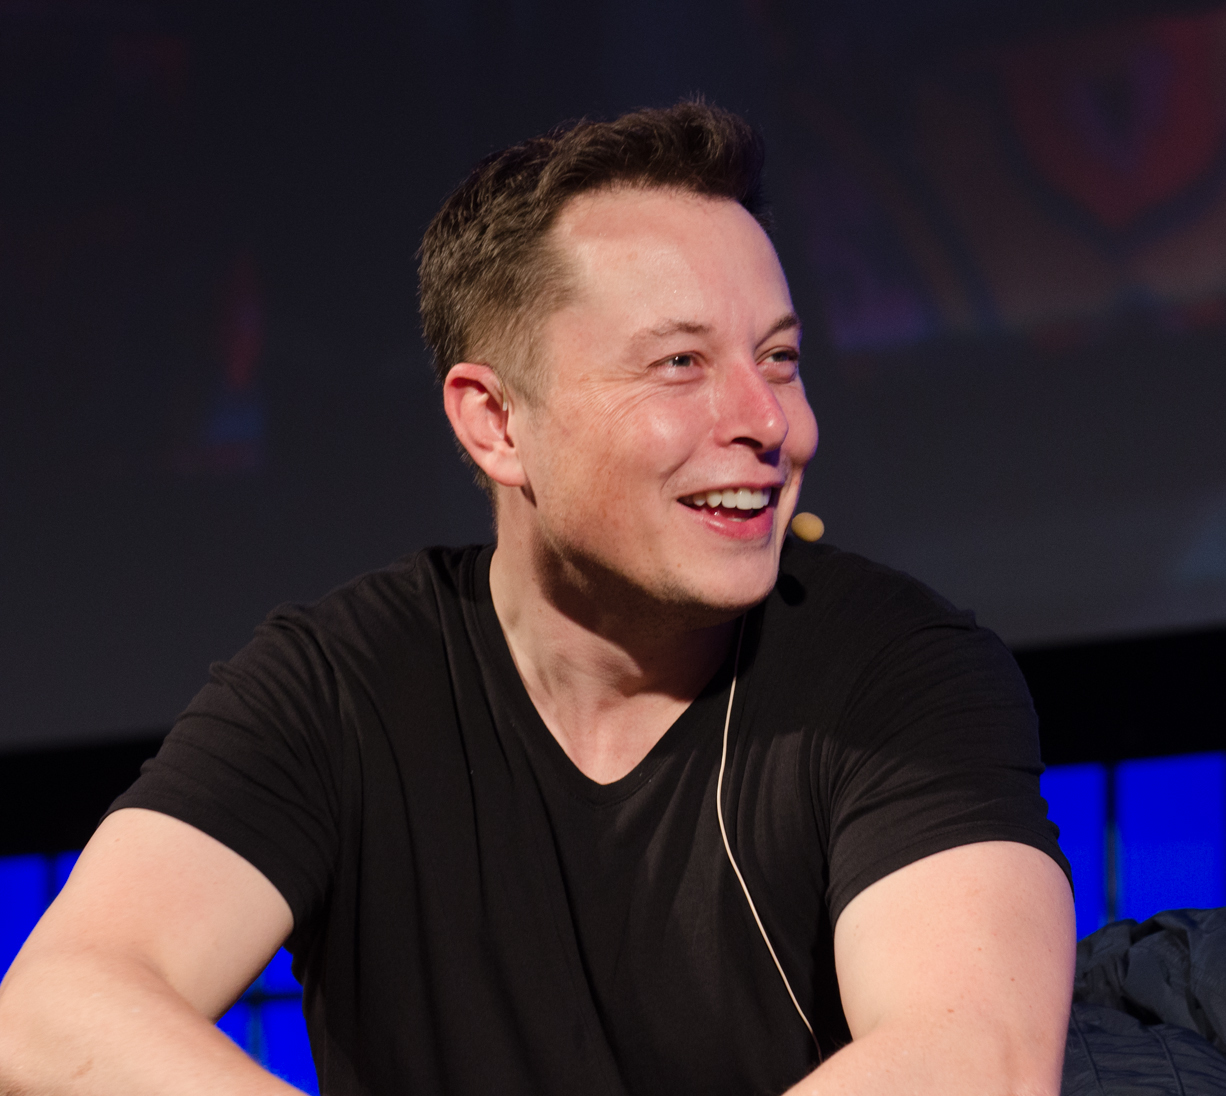 Elon Musk, CEO of Tesla and SpaceX, is one of the most intense and ambitious people on earth. And it shows in his hiring process. Credit: Wikipedia Commons